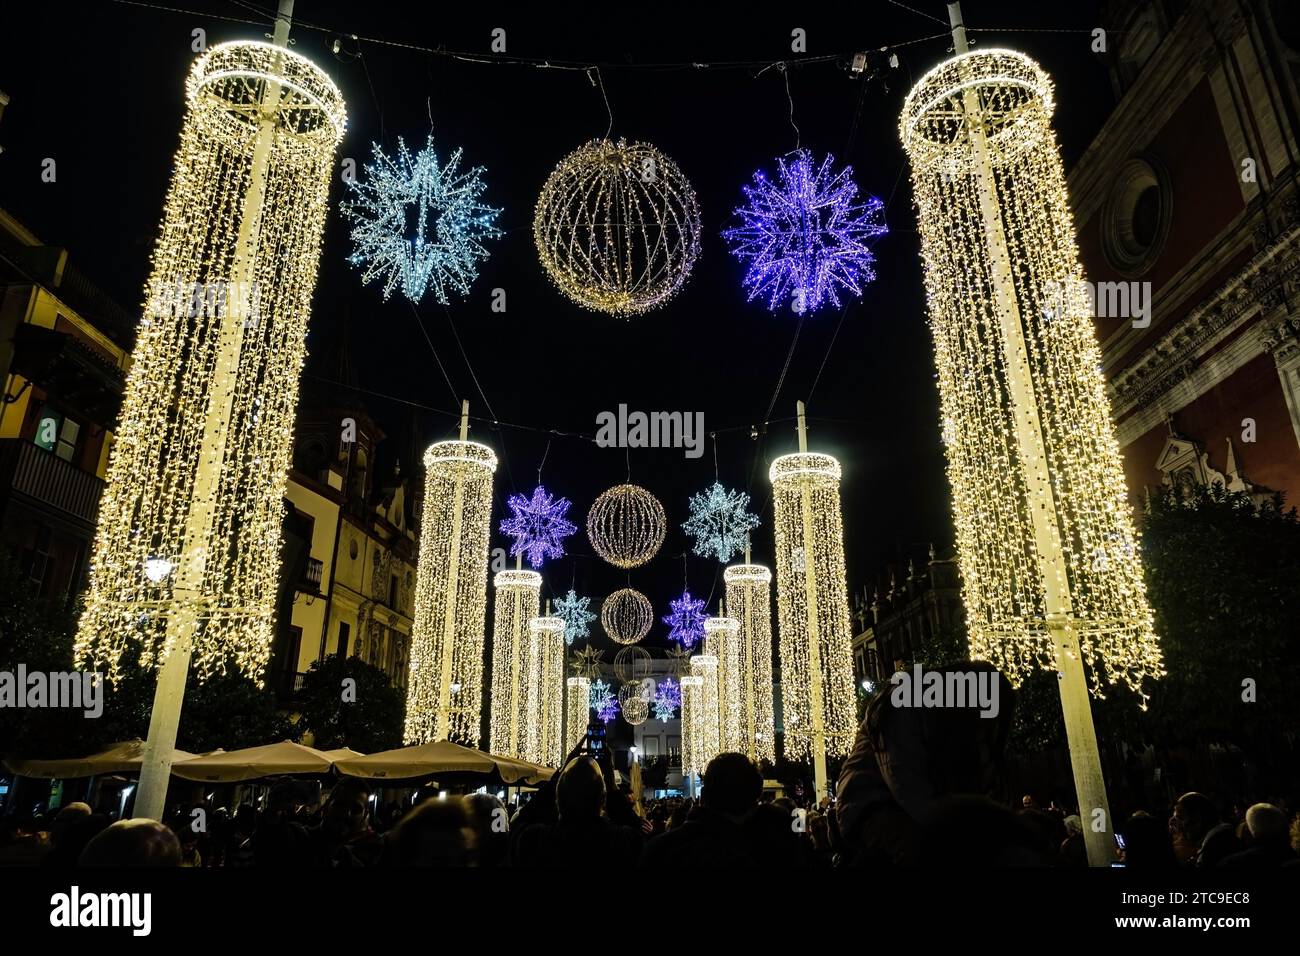 Elegant Holiday Light Columns and Snowflakes, Majestic columns of holiday lights and sparkling snowflakes dazzle in the night. in Seville, Spain. Stock Photo